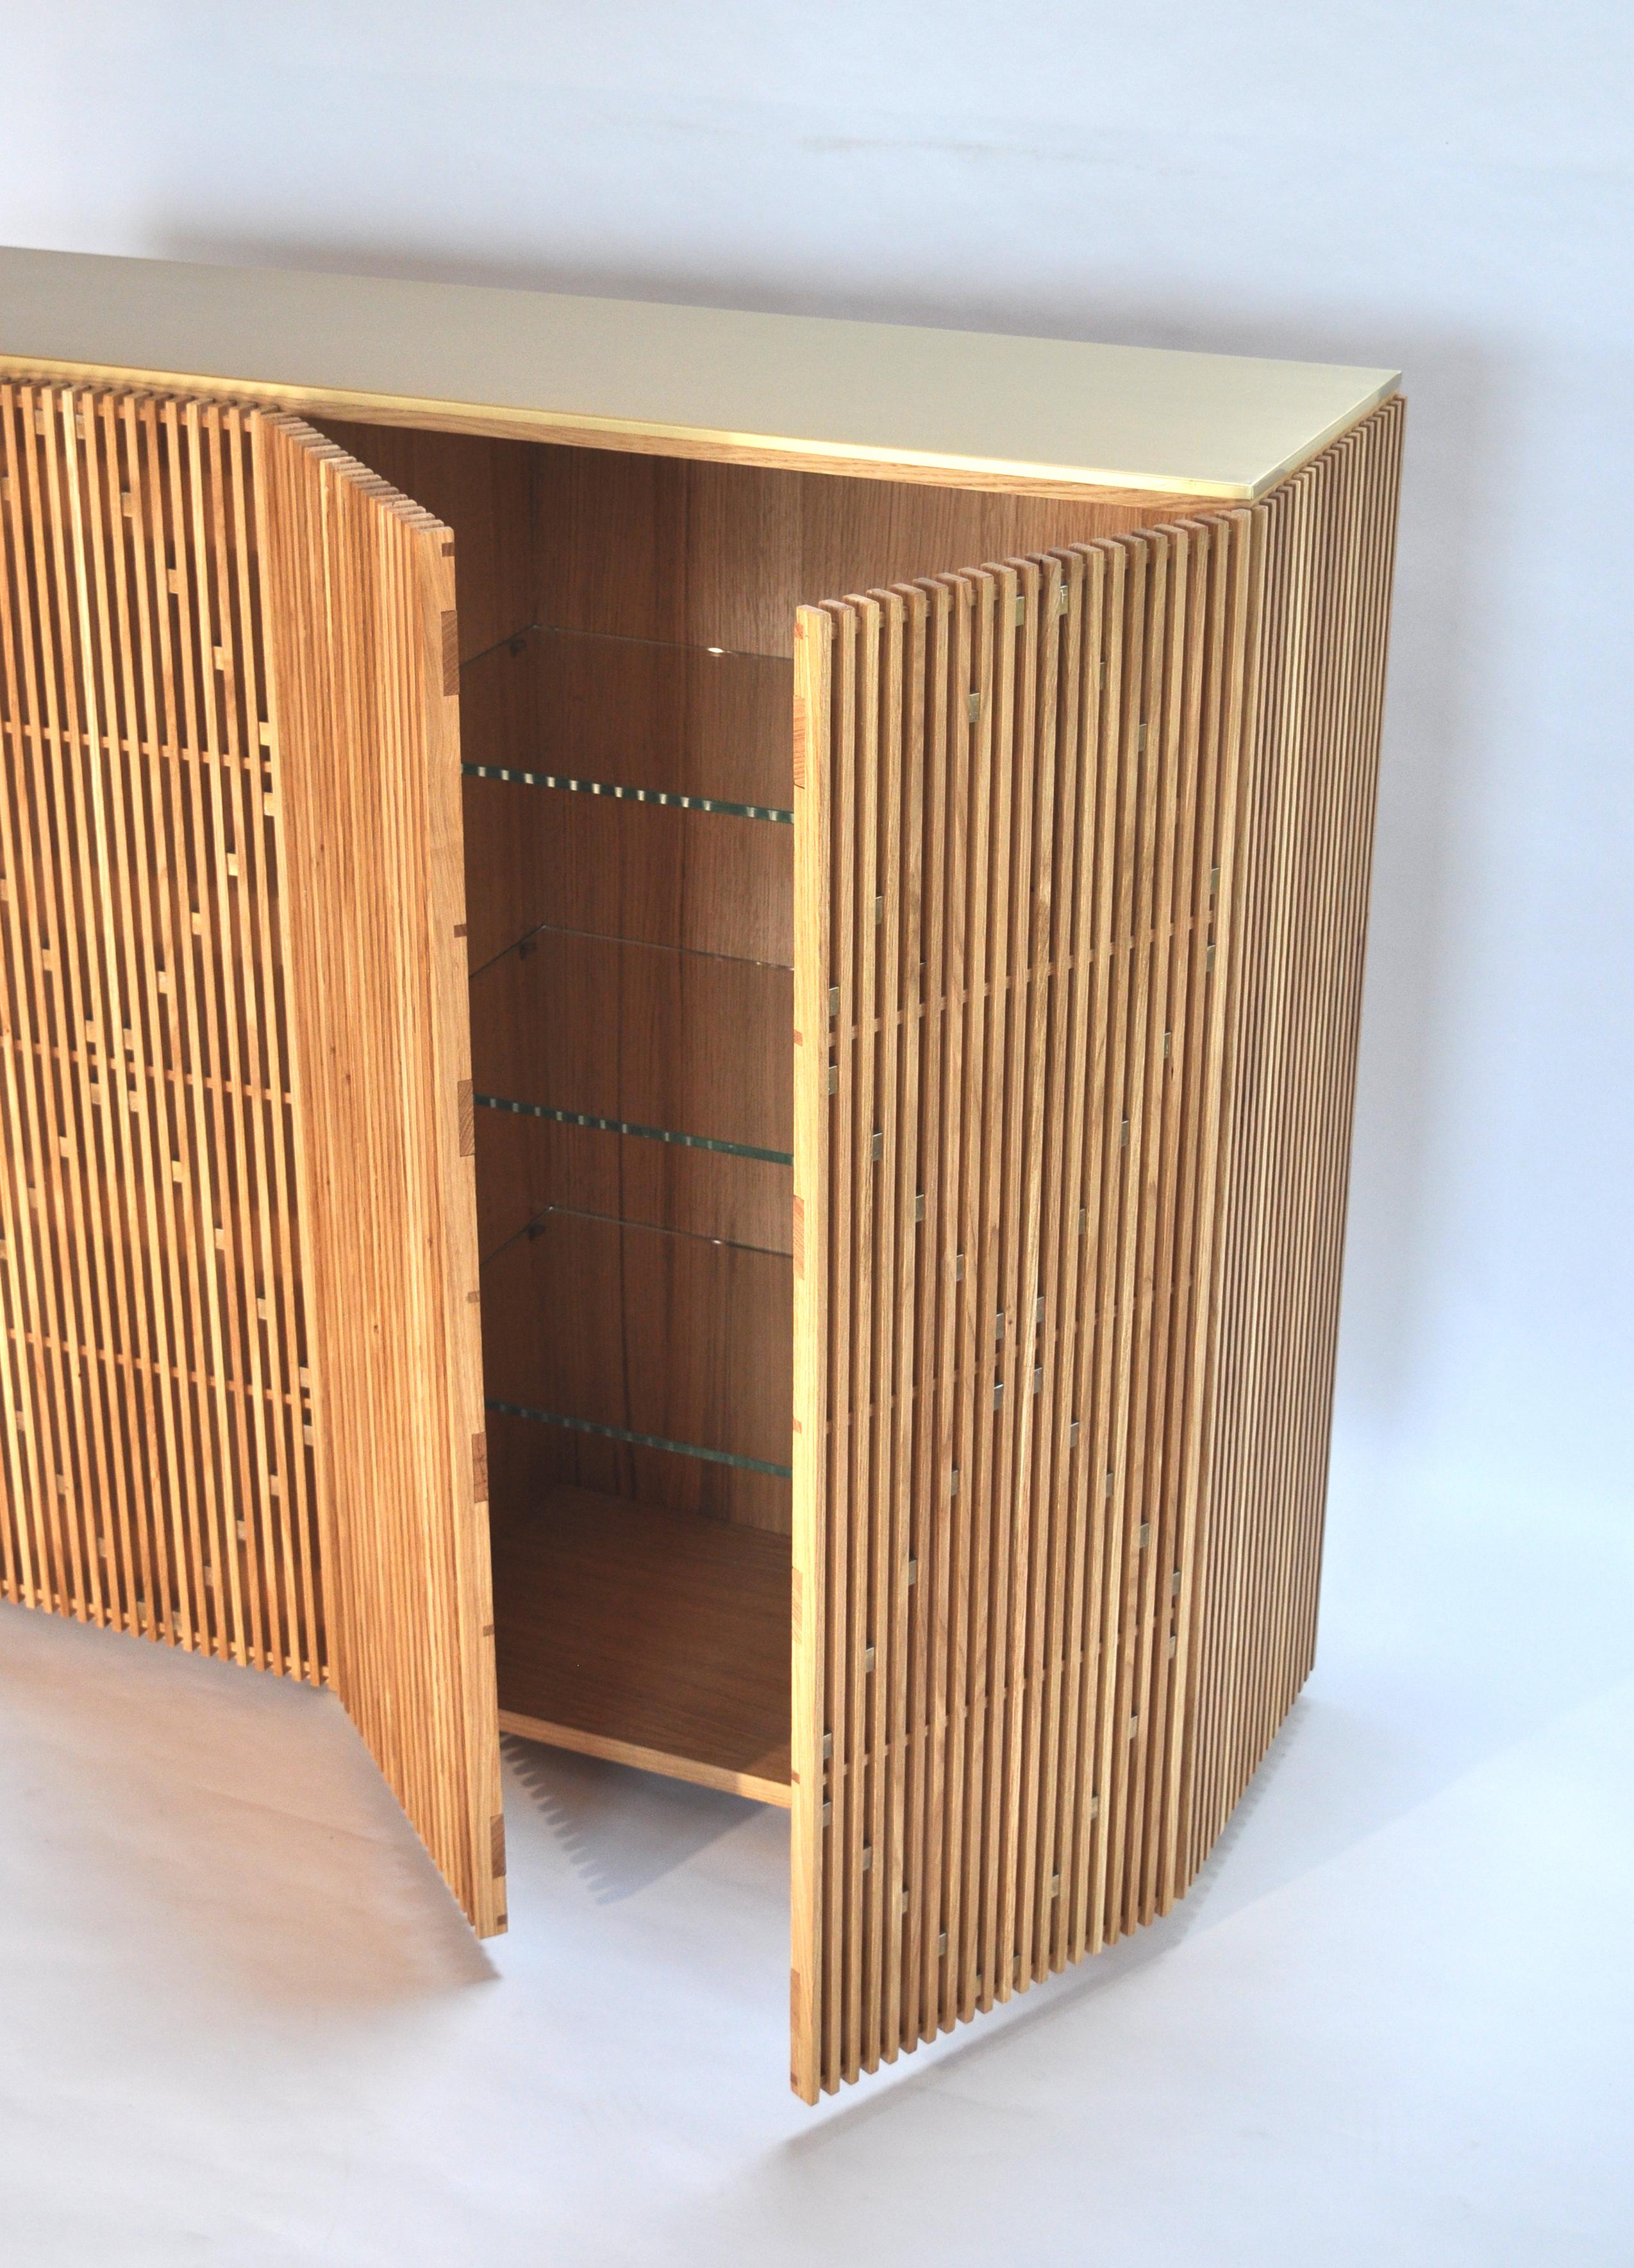 Cabinet Milione by Debonademeo for Medulum, Oakwood and Brass, Covered in Brass In New Condition For Sale In Meolo, Venezia